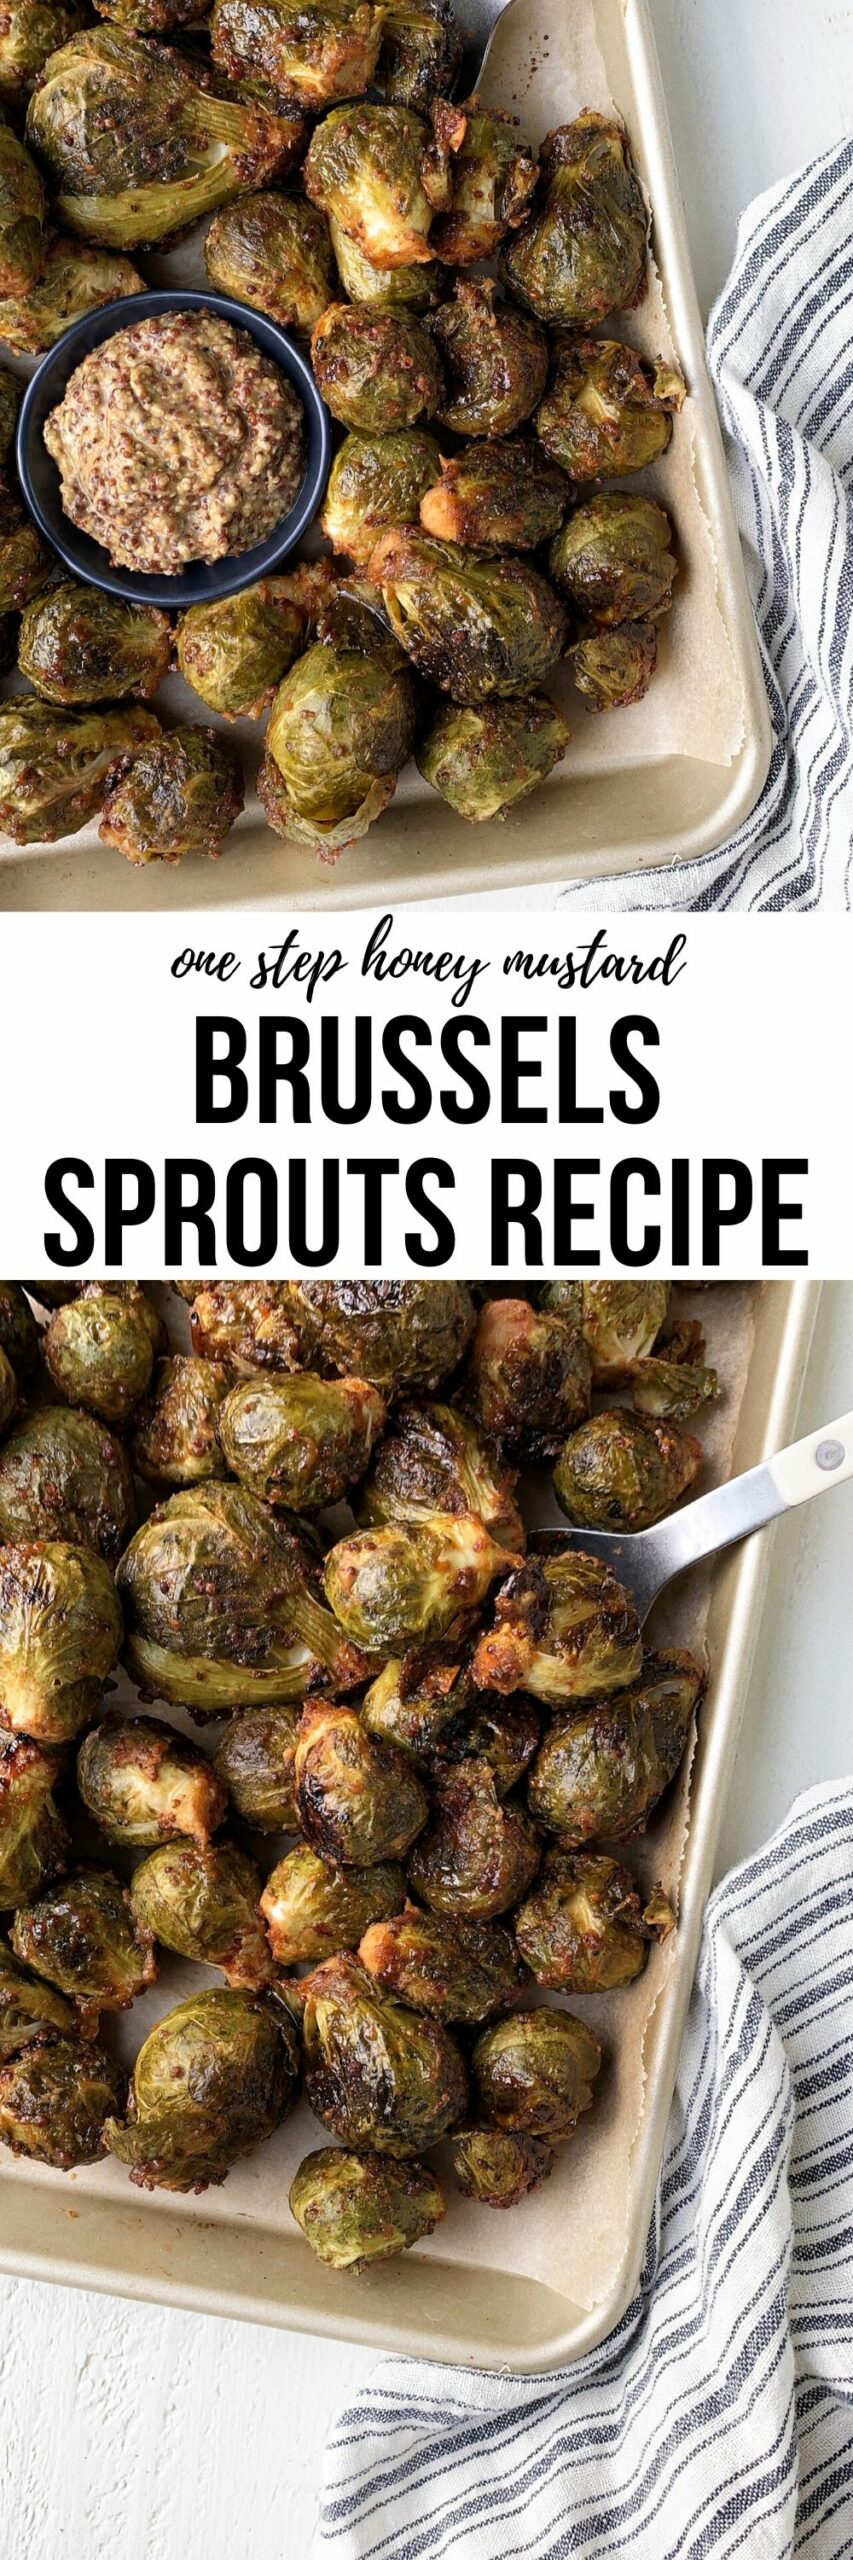 honey mustard brussels sprouts recipe